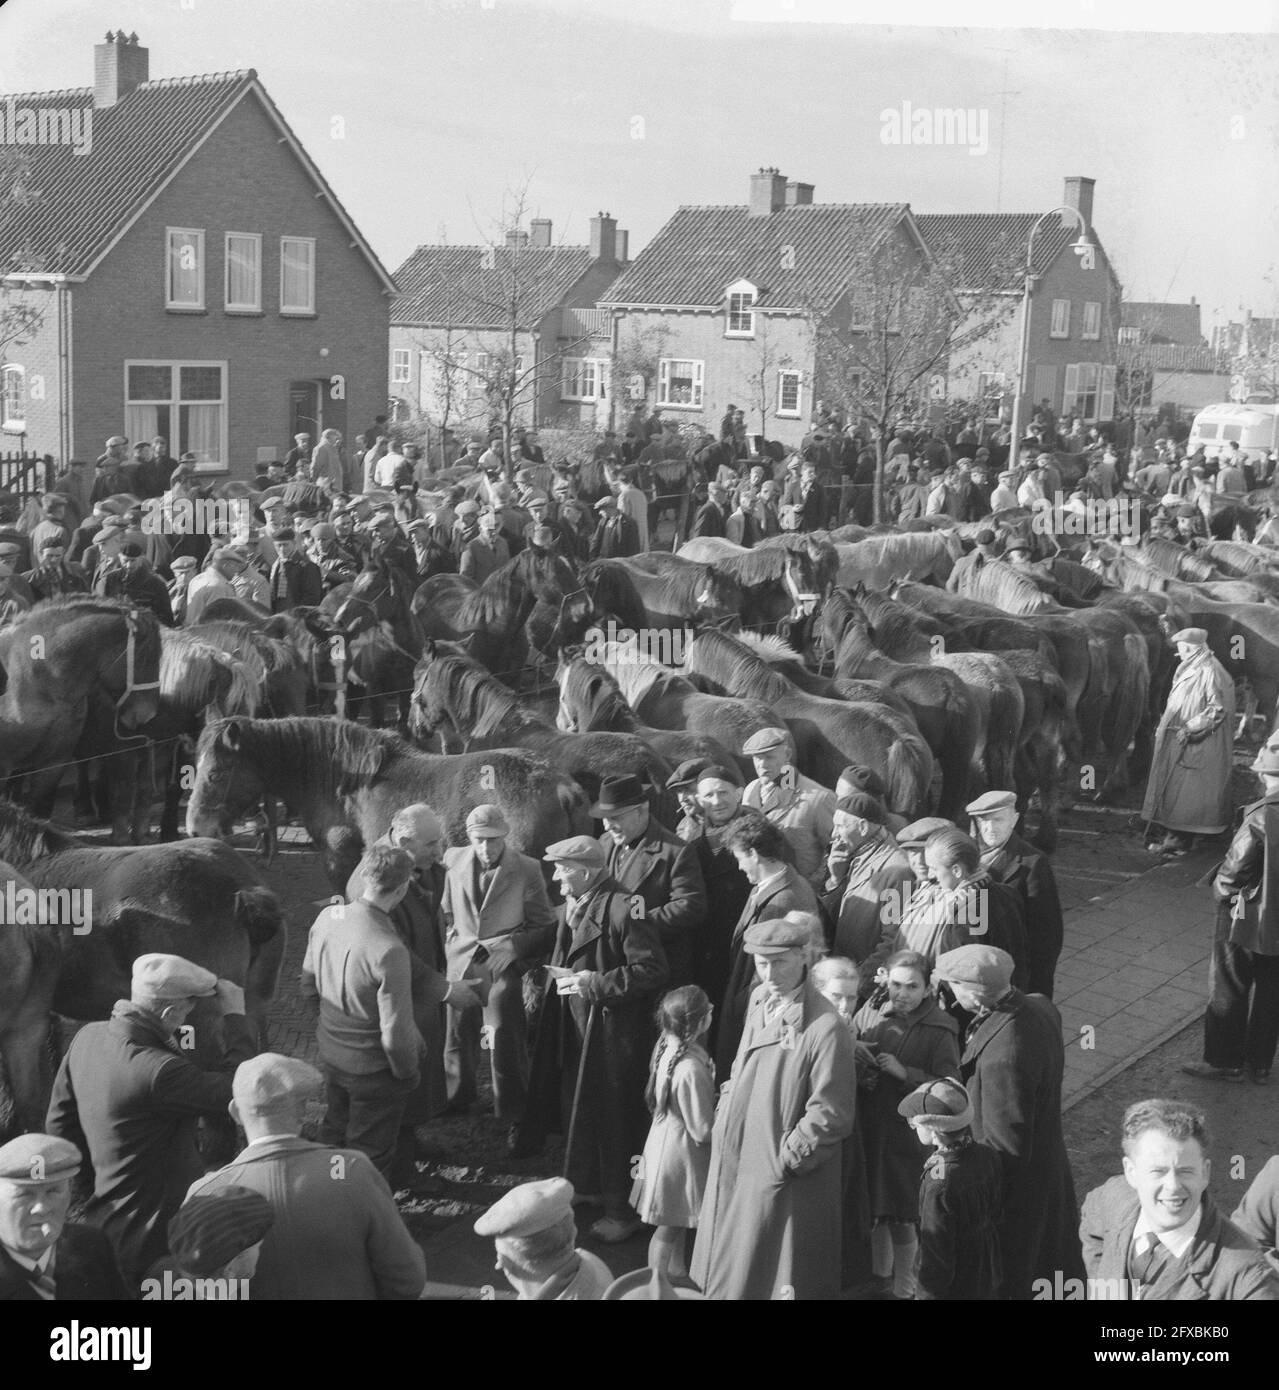 Annual horse market at Hedel, overview of the market, 7 November 1960, markets, overviews, horse markets, The Netherlands, 20th century press agency photo, news to remember, documentary, historic photography 1945-1990, visual stories, human history of the Twentieth Century, capturing moments in time Stock Photo